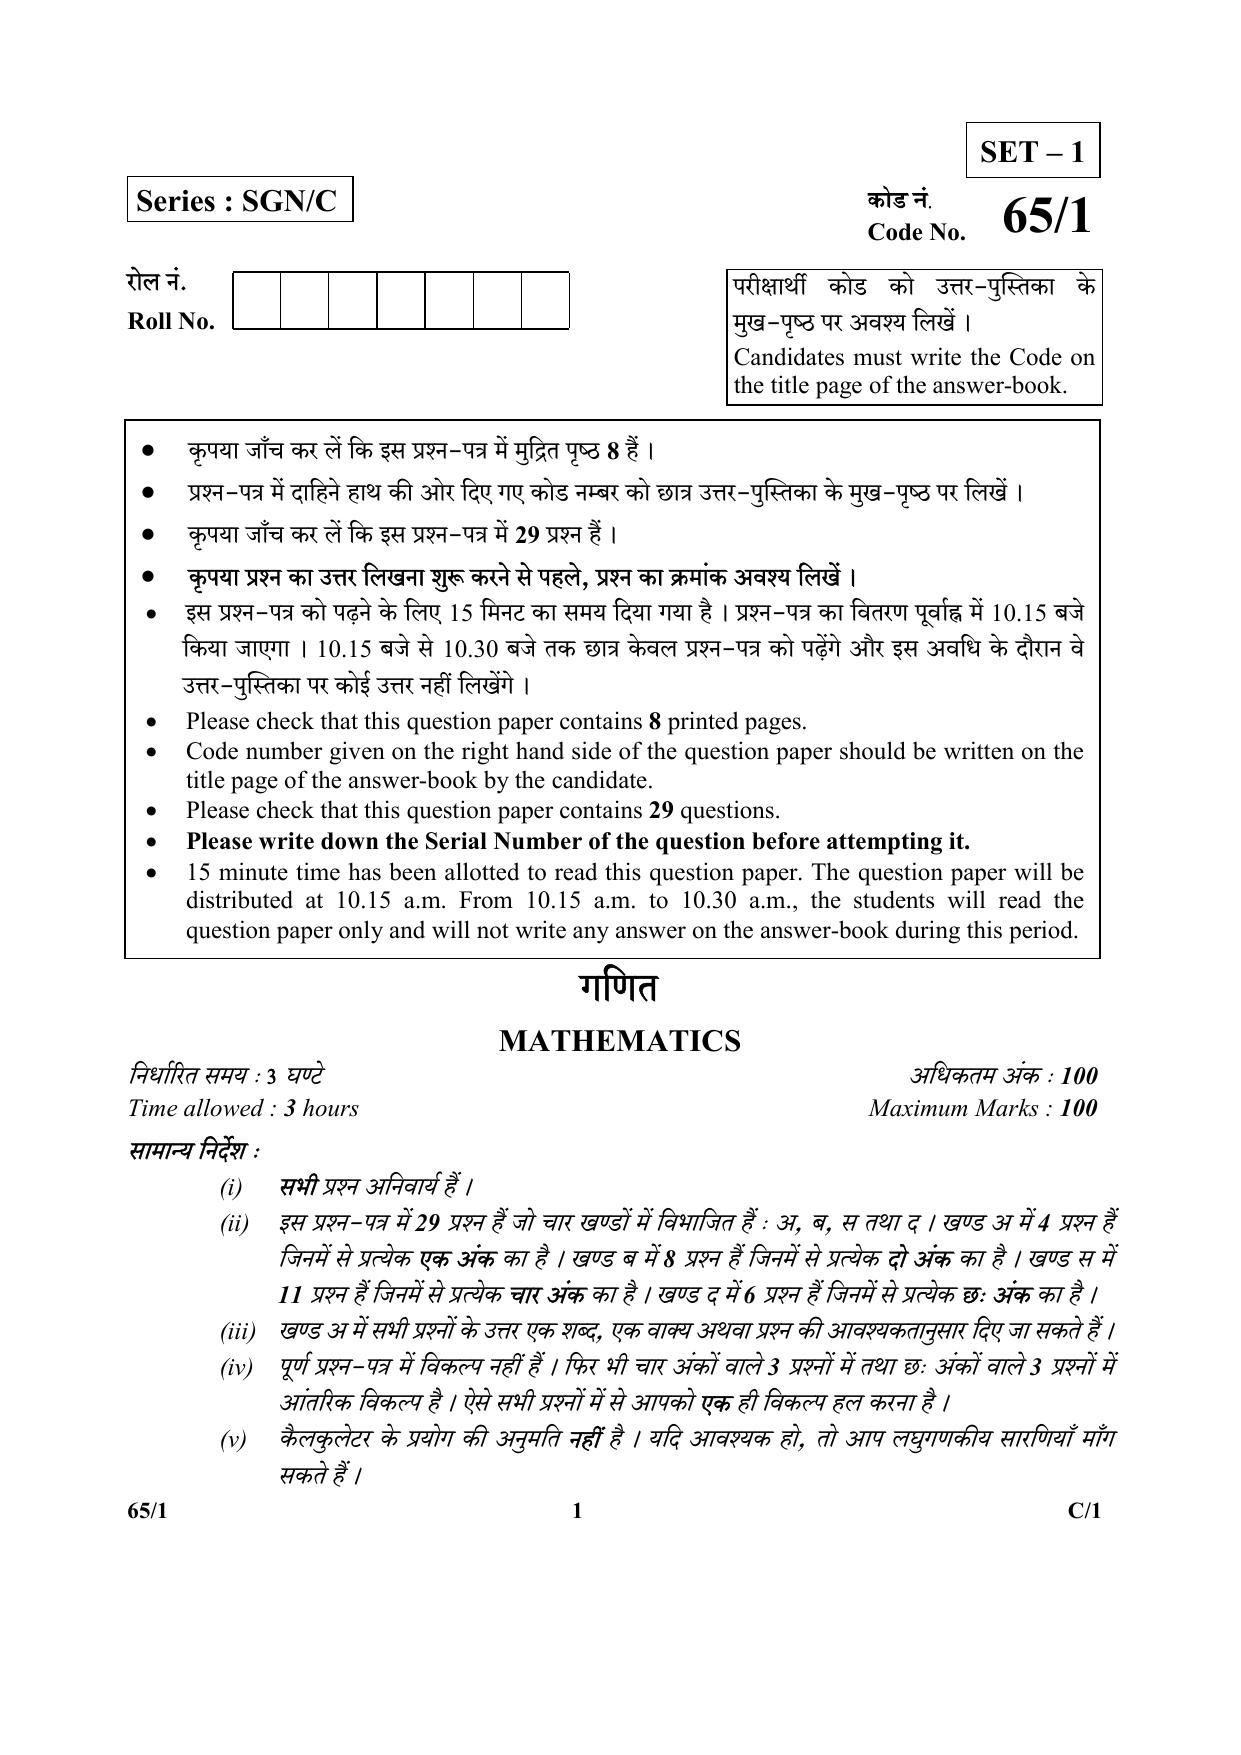 CBSE Class 12 65-1 (Mathematics) 2018 Compartment Question Paper - Page 1